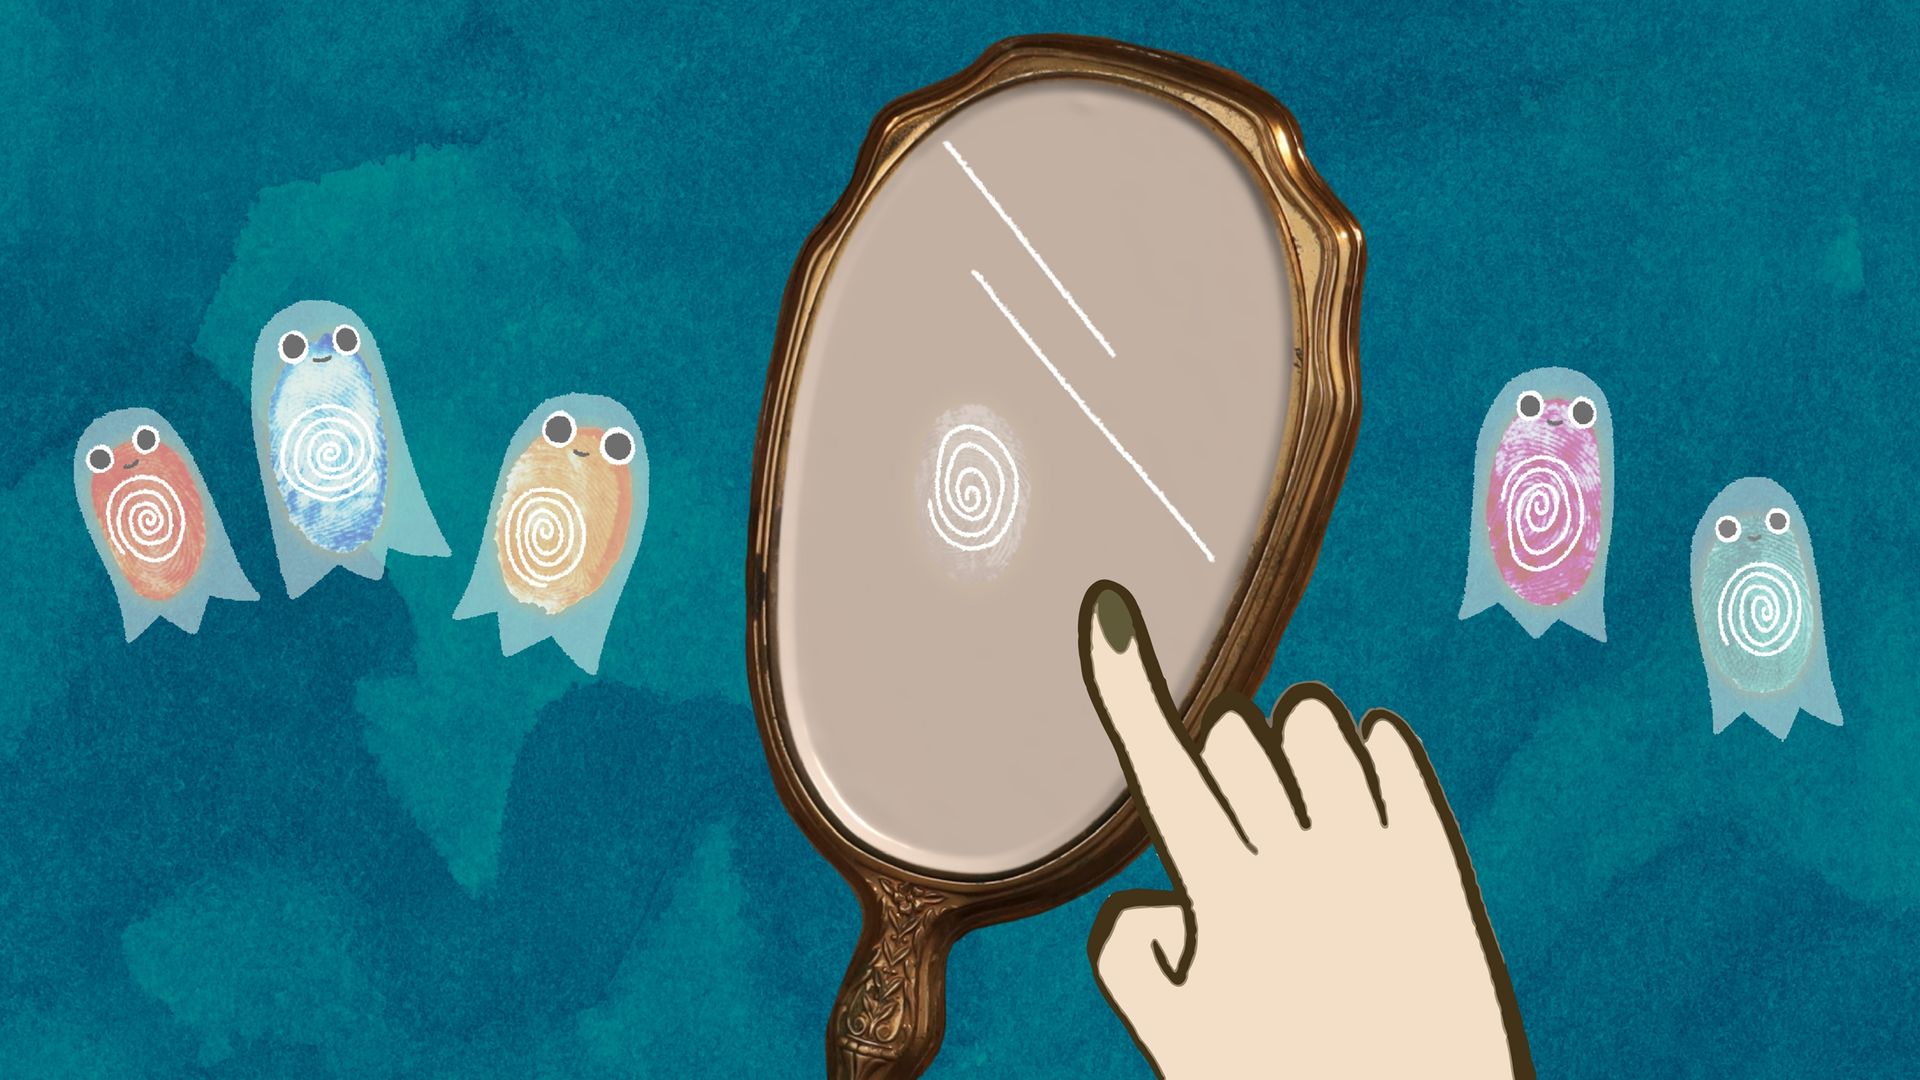 Illustration of a hand pointing to a mirror with a single fingerprint; little fingerprint ghosts float on either side of the mirror